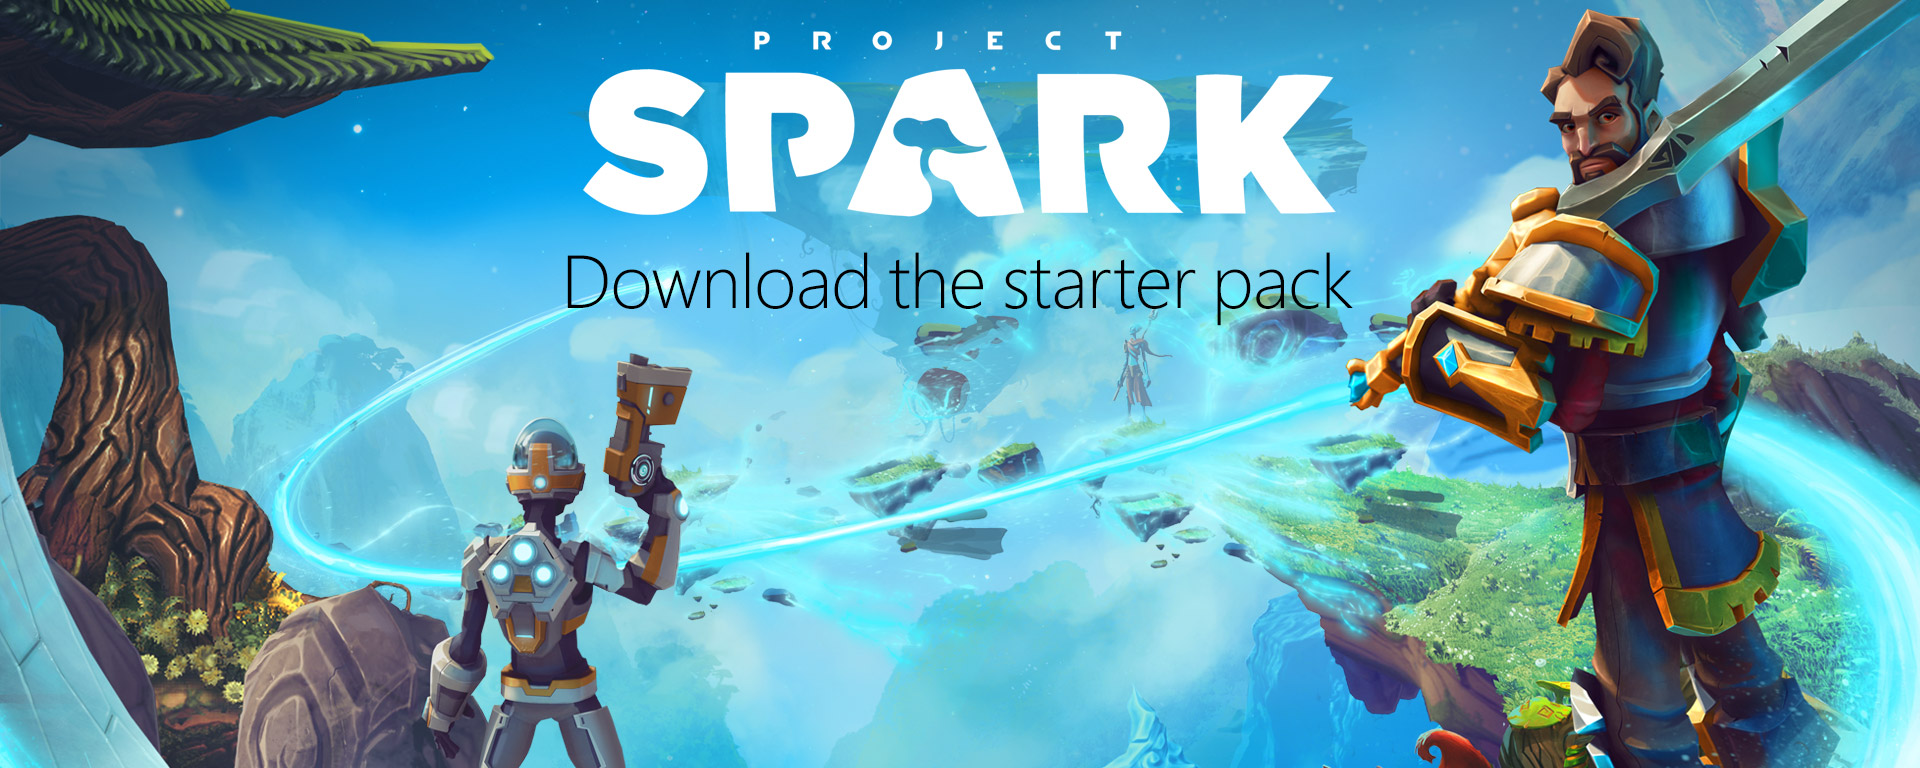 xbox project spark game